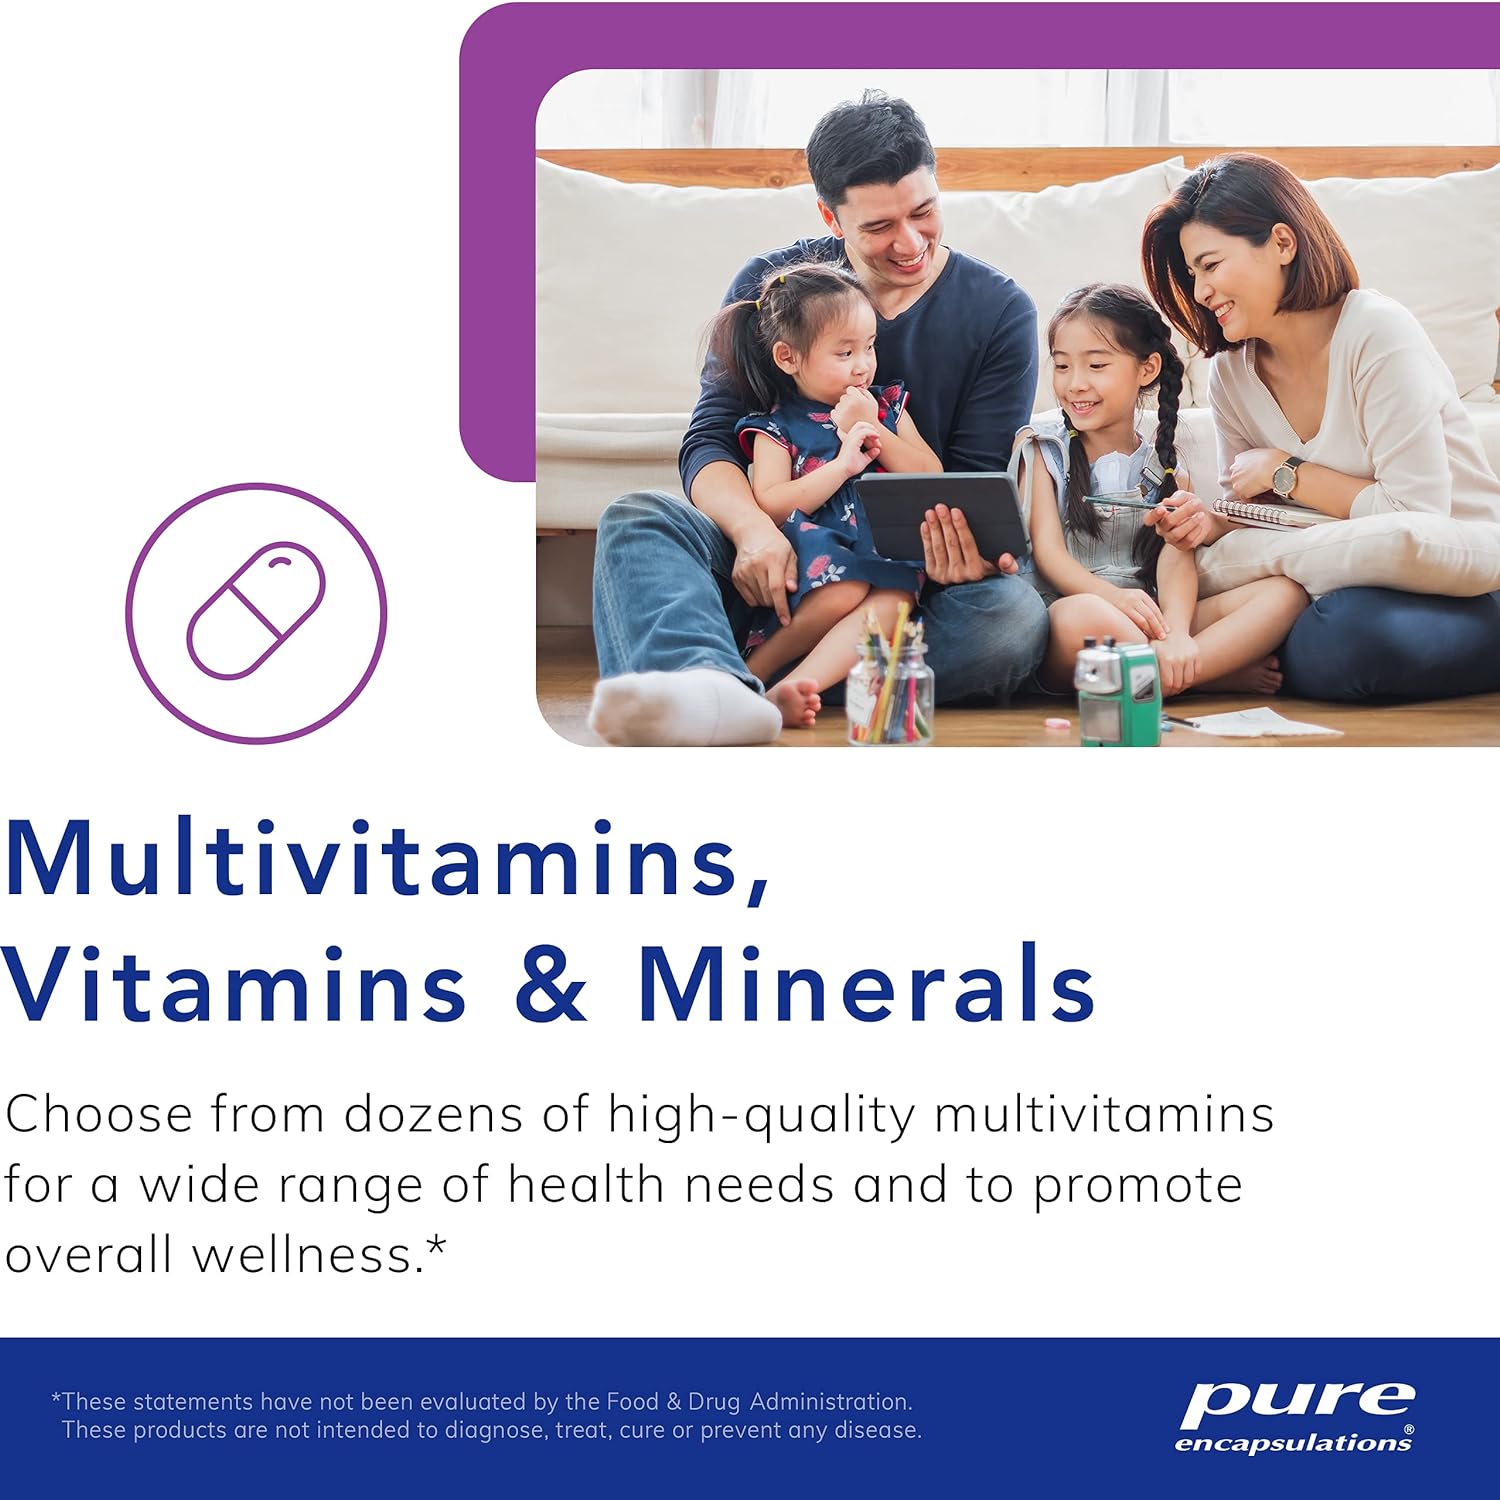 Pure Encapsulations B-Complex Plus - B Vitamins Supplement to Support Neurological Health, Cardiovascular Health, Energy Levels  Nervous System Support* - with Vitamin B12  More - 120 Capsules